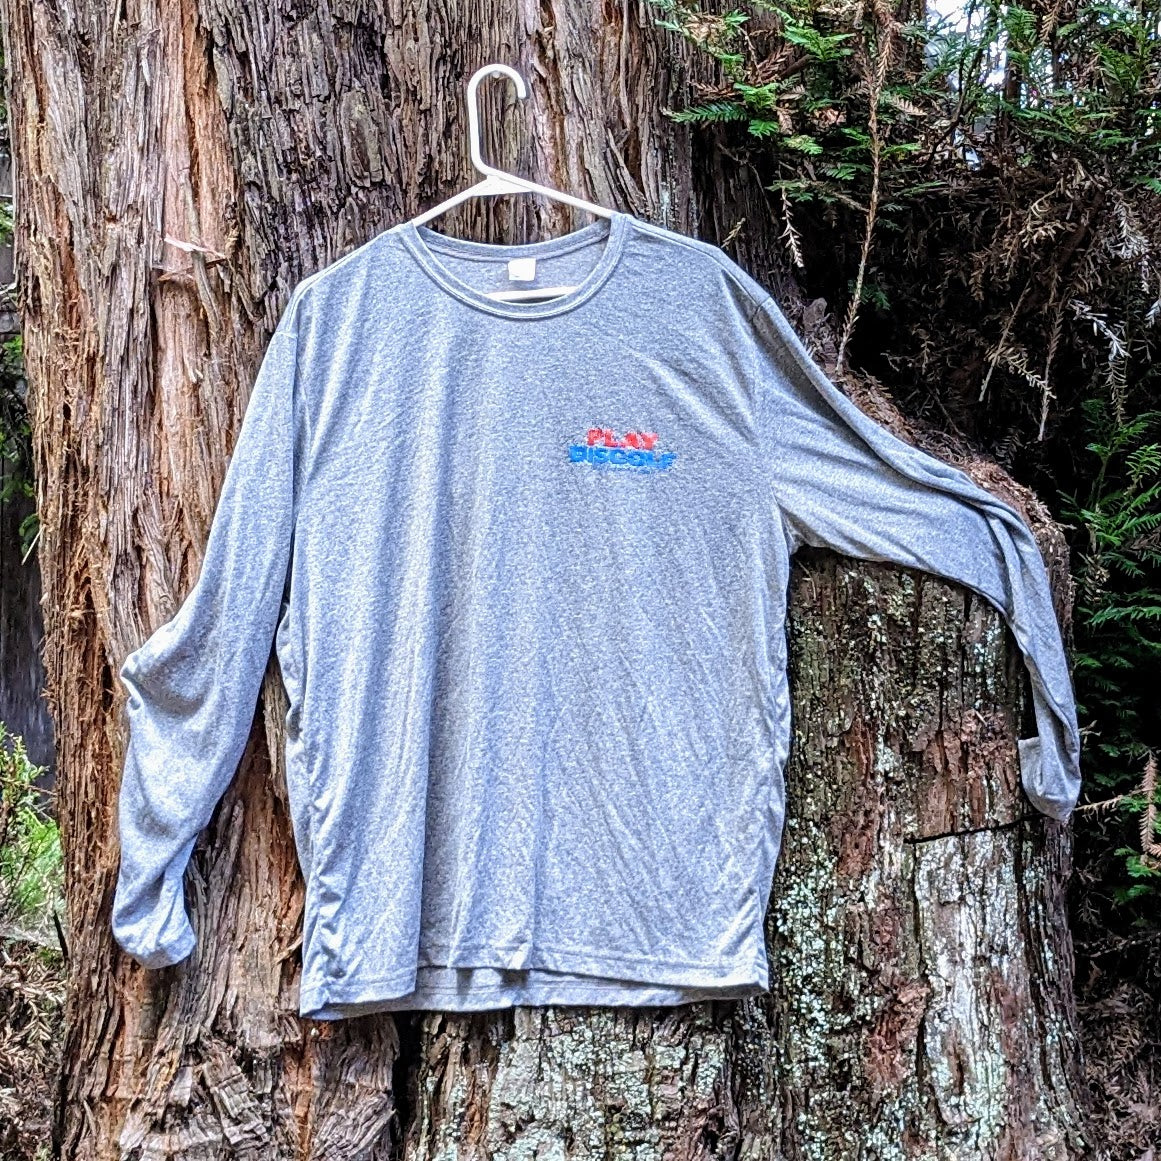 Clearance- Gray Long Sleeve with the Play DiscGolf logo front and back, Size Large